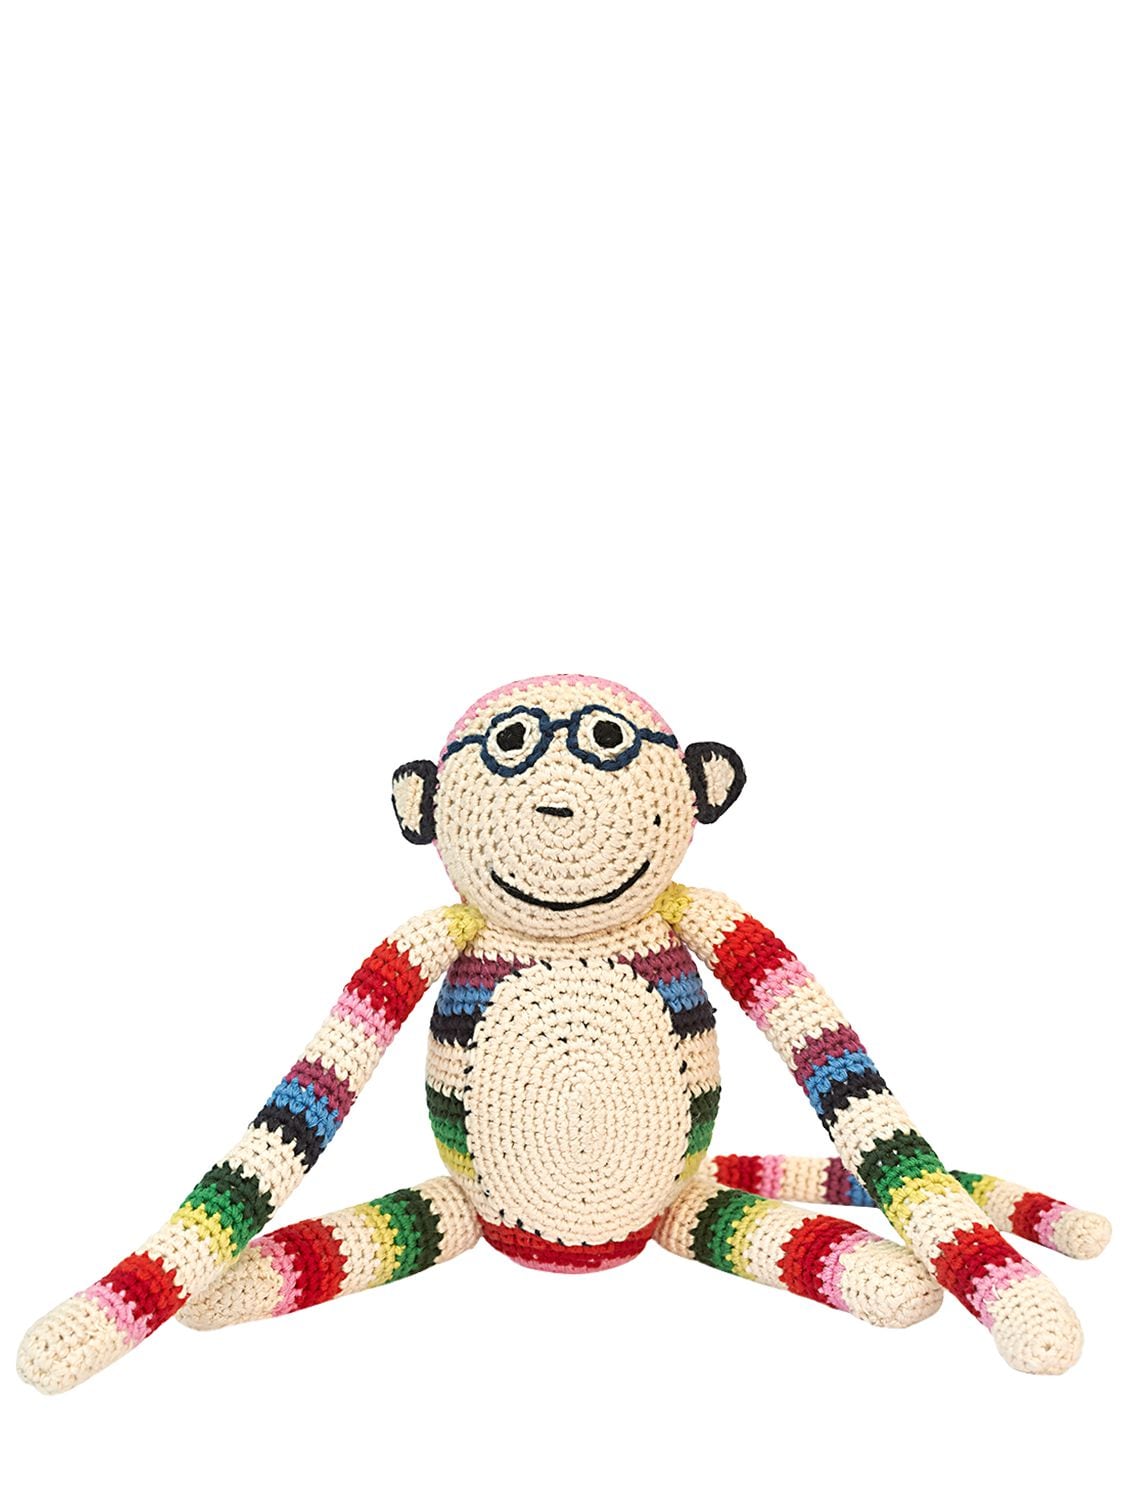 Anne-claire Petit Kids' Hand-crocheted Organic Cotton Monkey In White